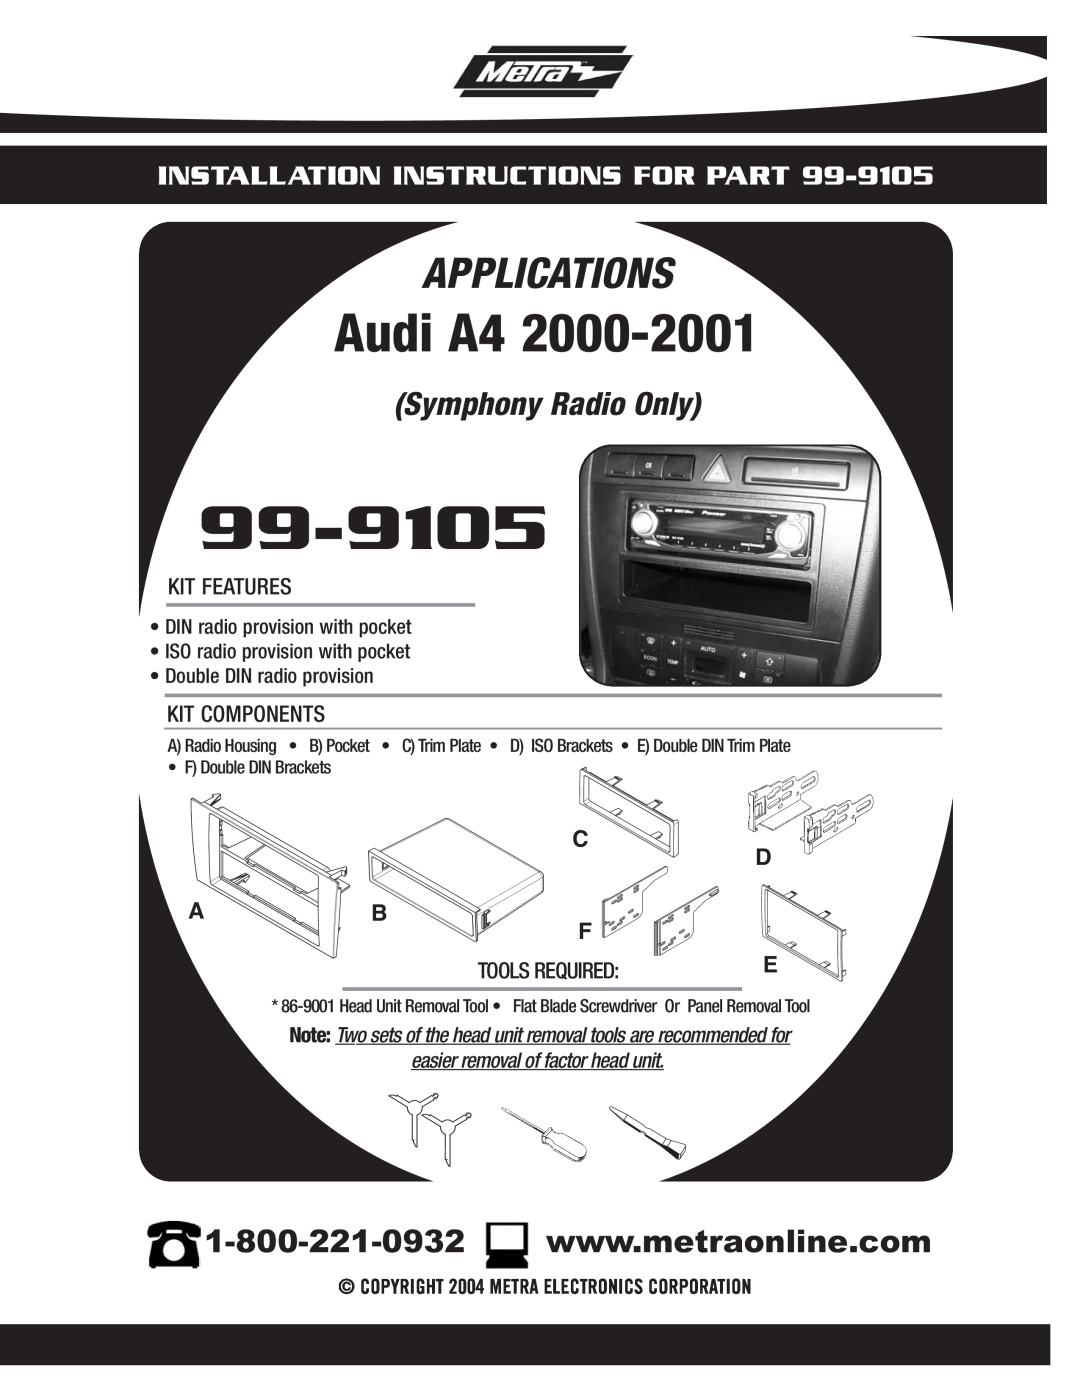 Metra Electronics 99-9105 installation instructions Audi A4, Applications, Symphony Radio Only, Tools Required 